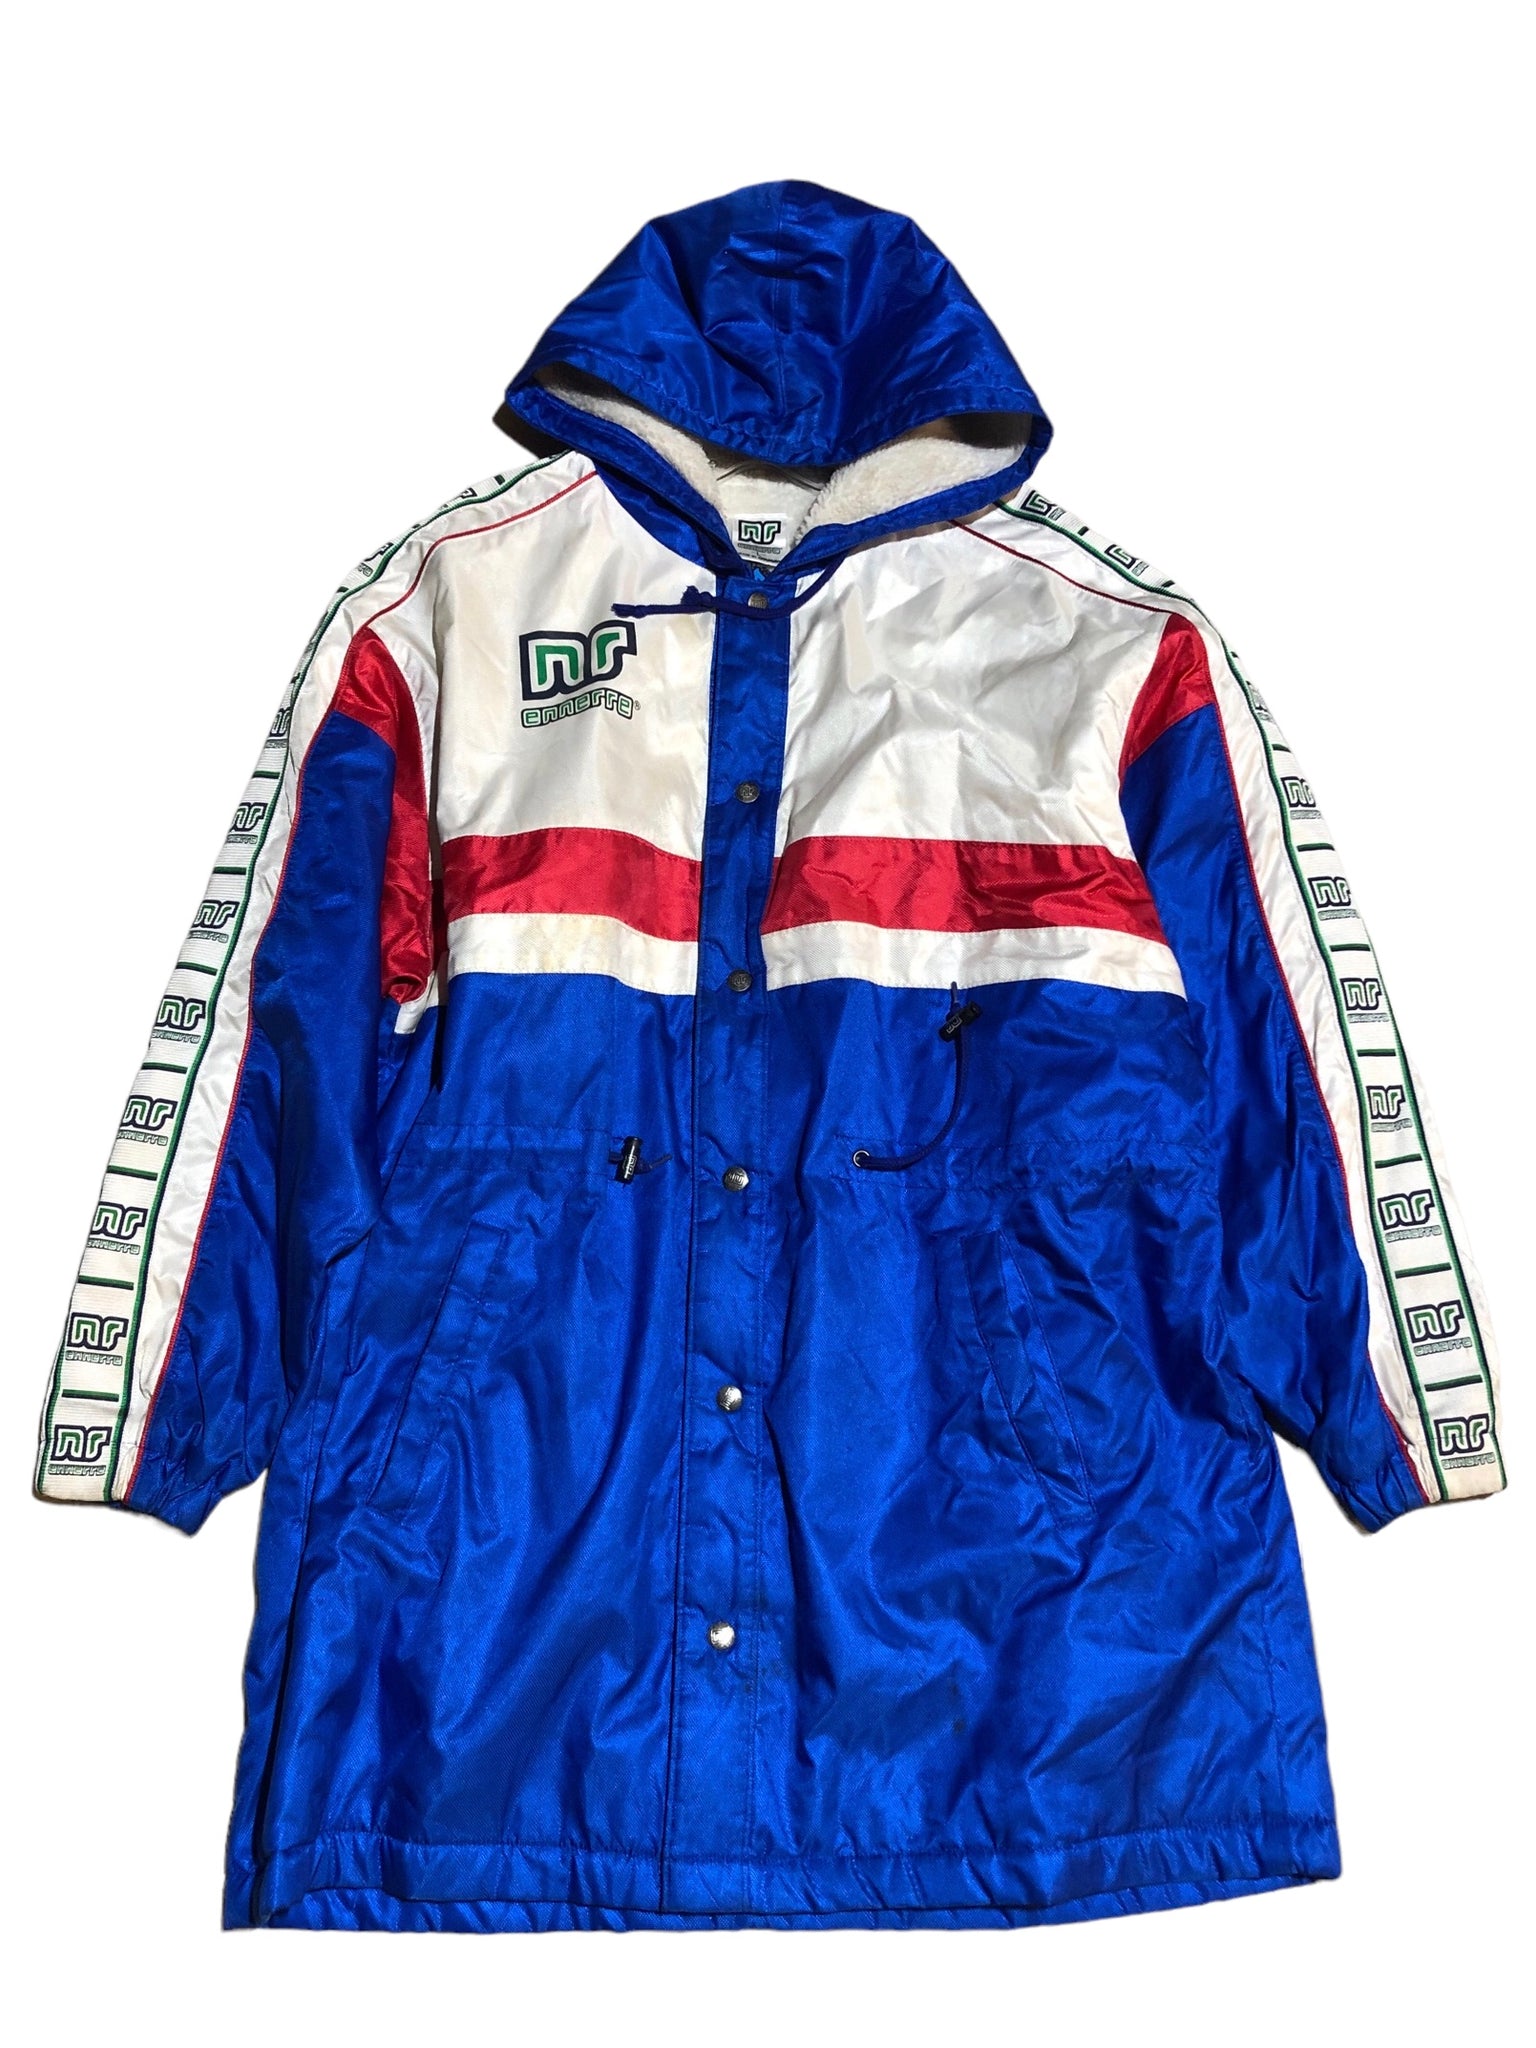 Red/White/Blue Vintage Jacket by Ennerre